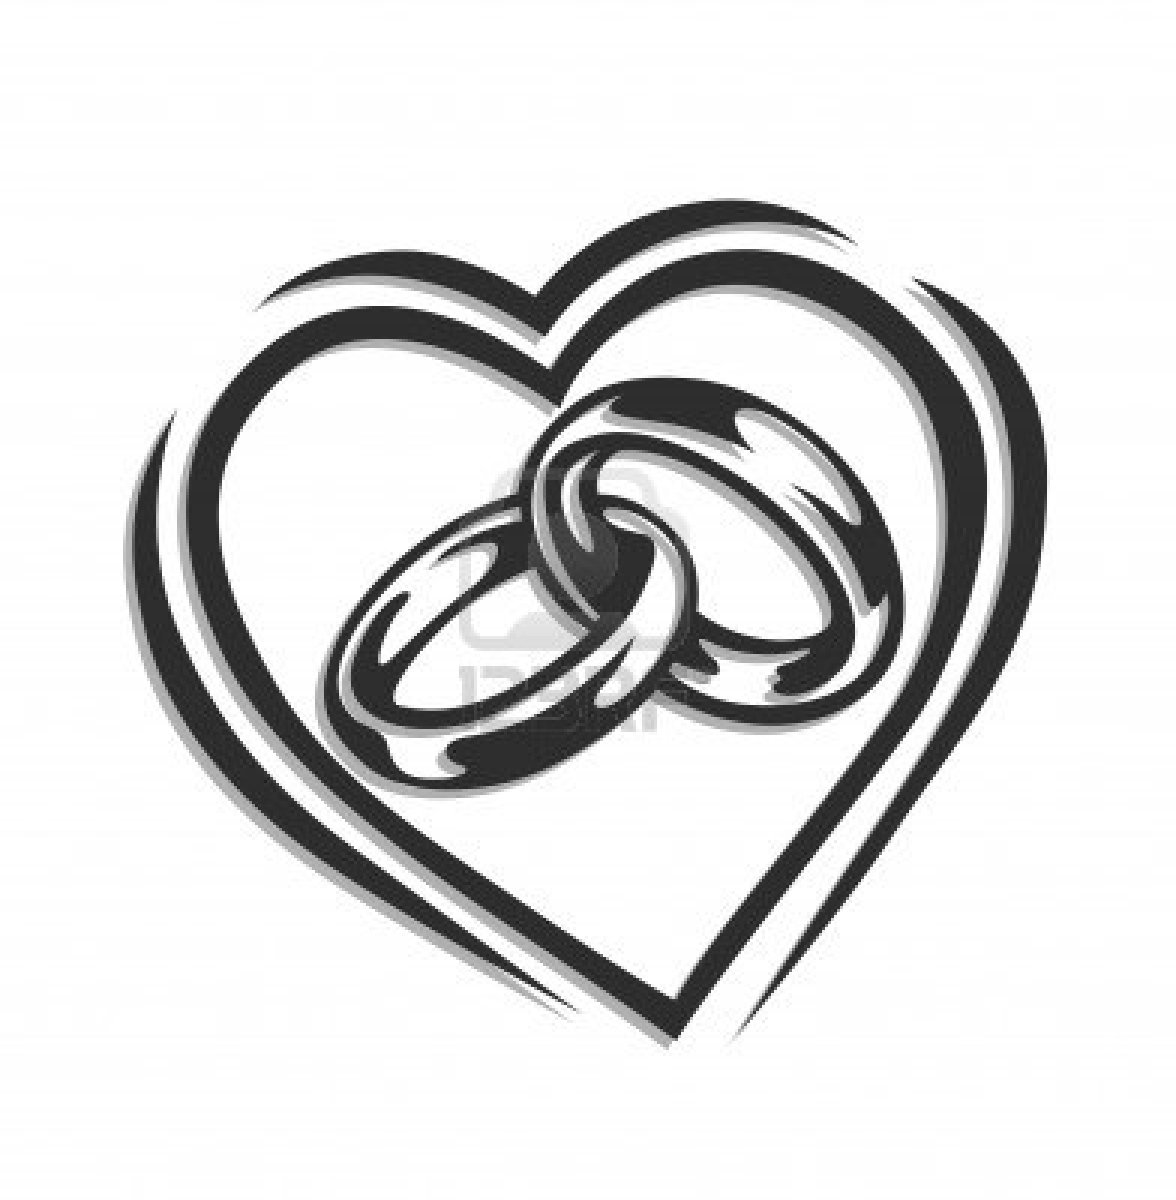 linked wedding rings clipart - Clipart Wedding Rings